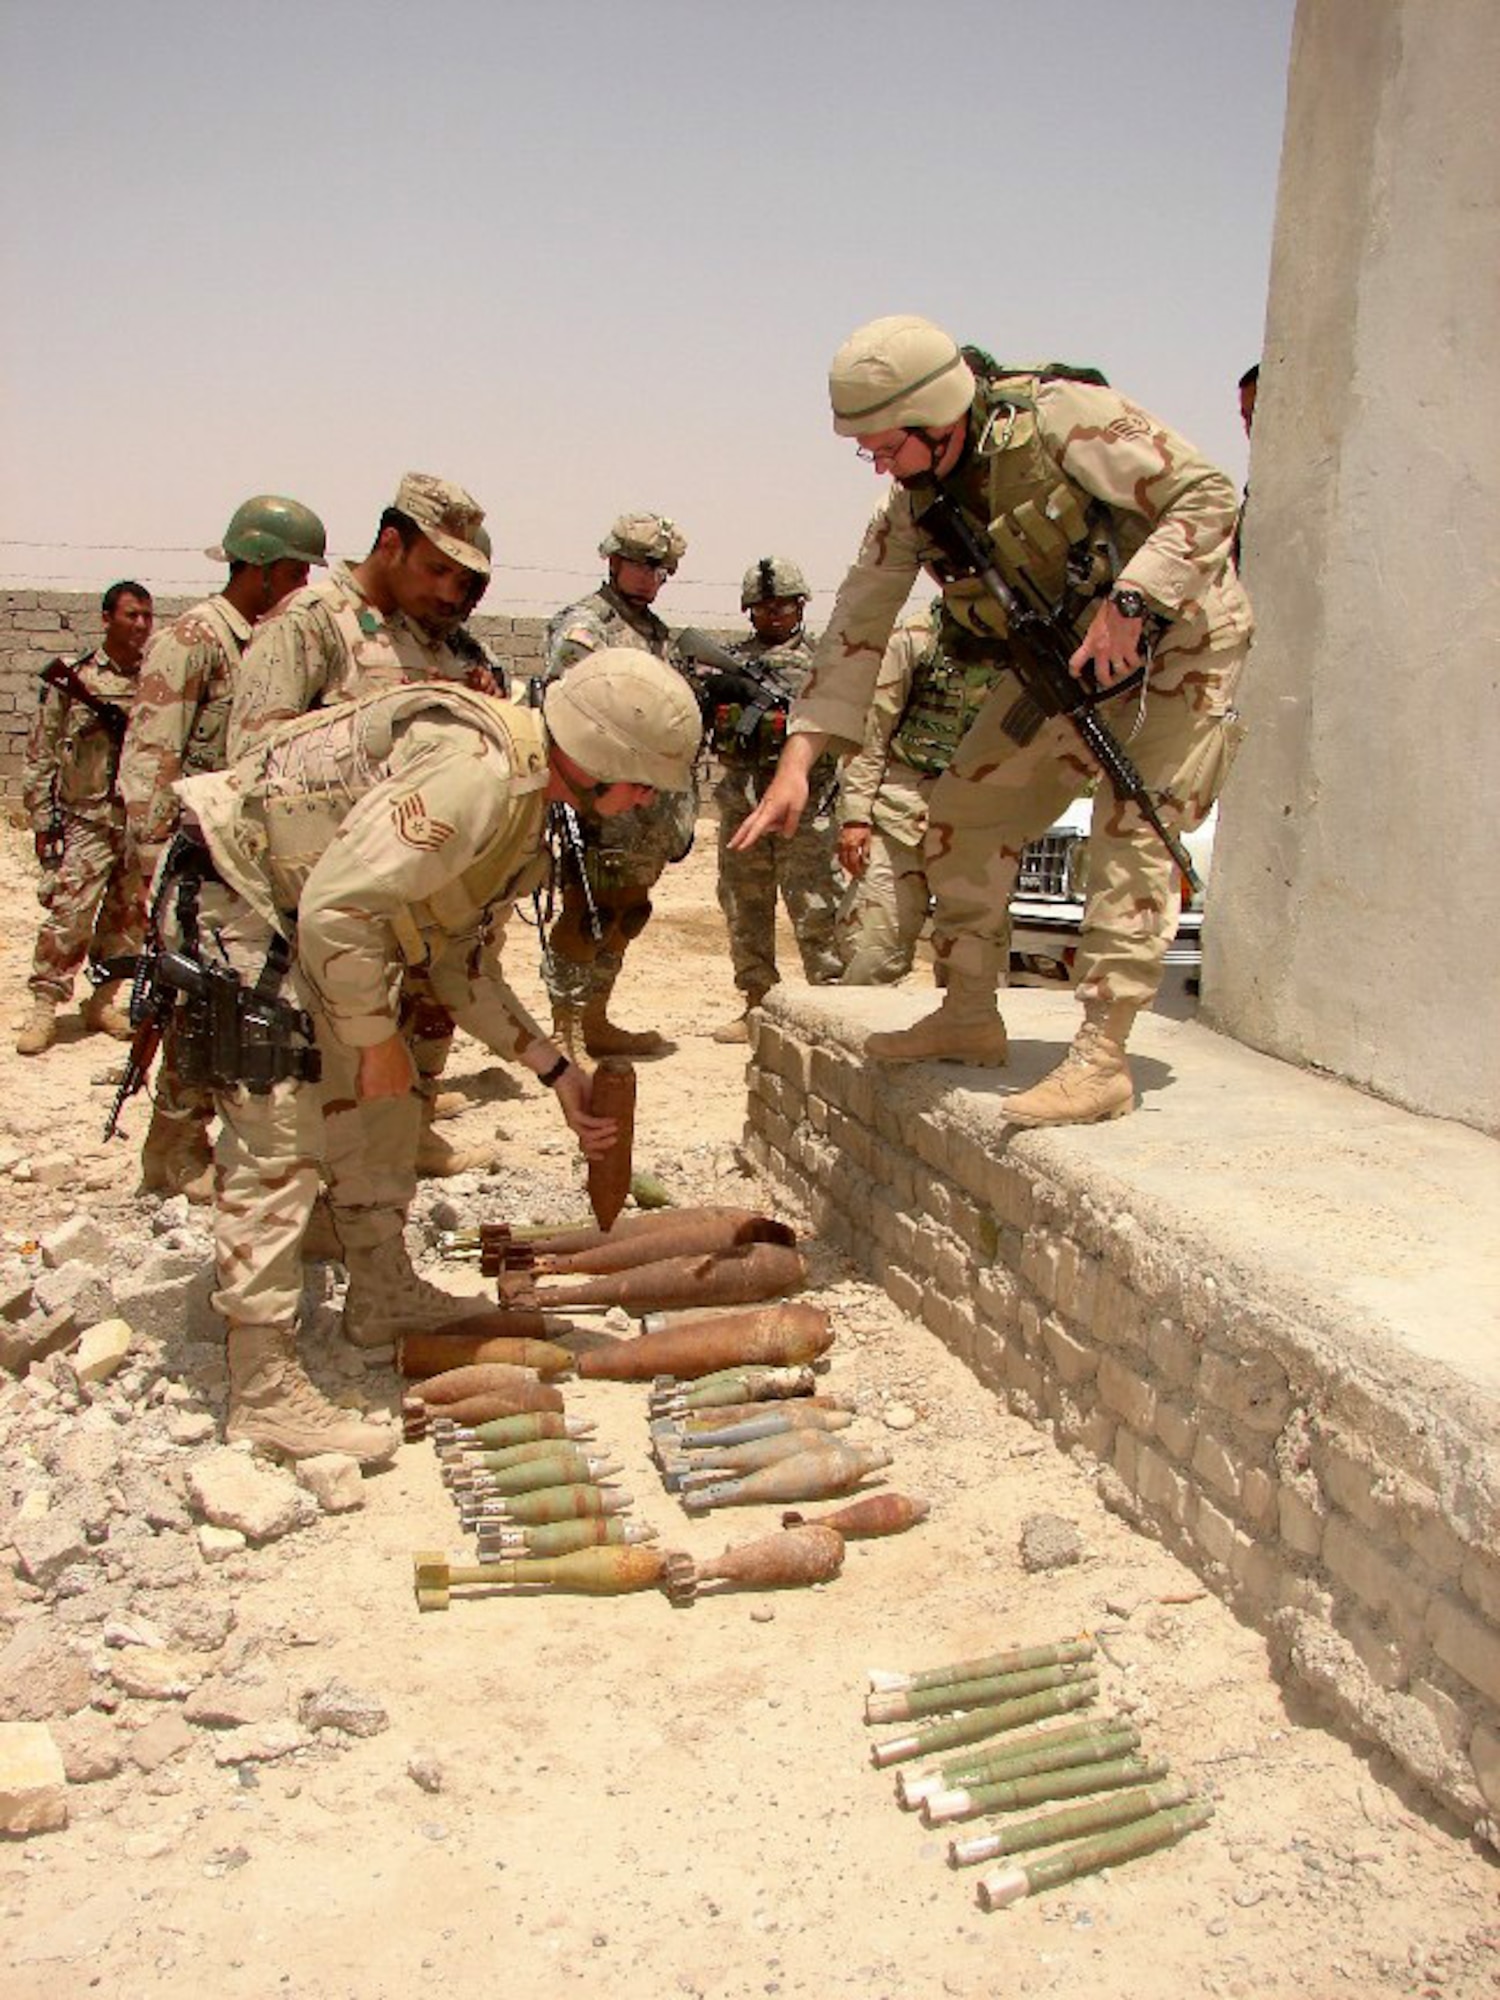 Staff Sgt. Kristoffer Solesbee (right) describes identification features and safety concerns of various unexploded ordnance as Staff Sgt. Christopher Stoup shows the ordnance to Iraqi Army soldiers from the 5th Iraqi Army Bomb Disposal Company March 12 in Iraq. (U.S. Air Force photo) 